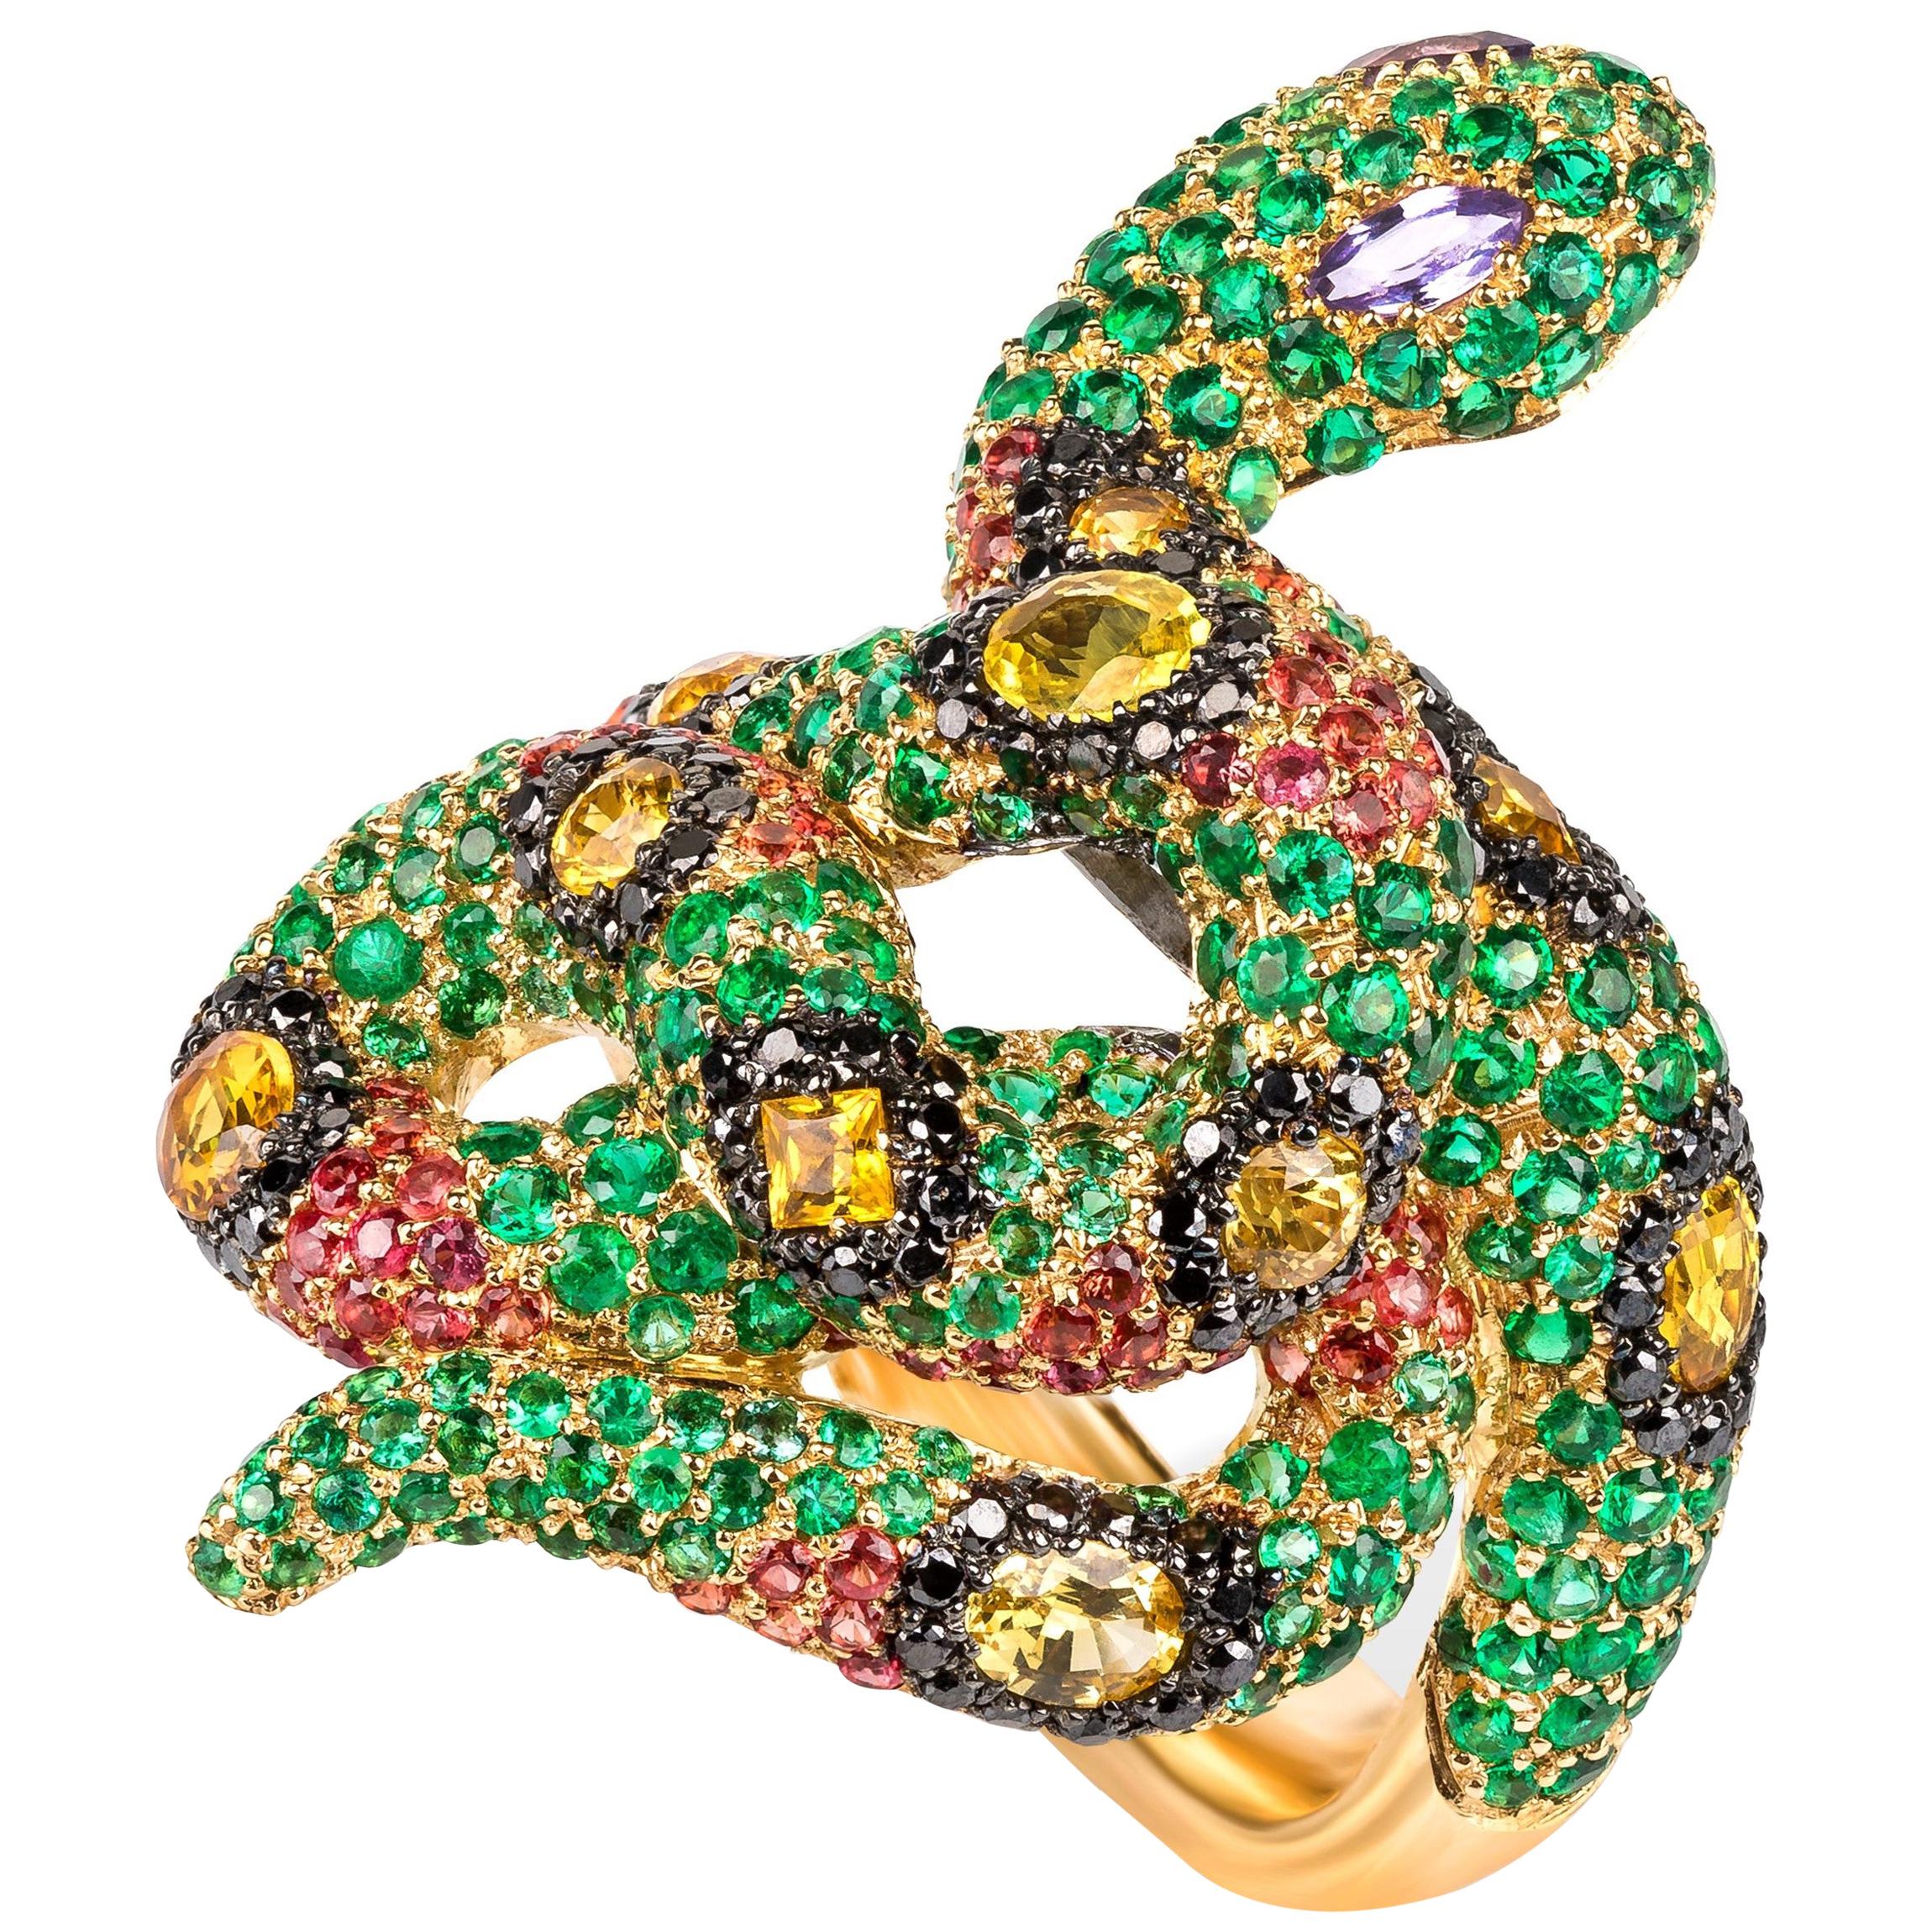 Rosior one-off Diamond, Emerald and Sapphire Contemporary "Serpent" Ring